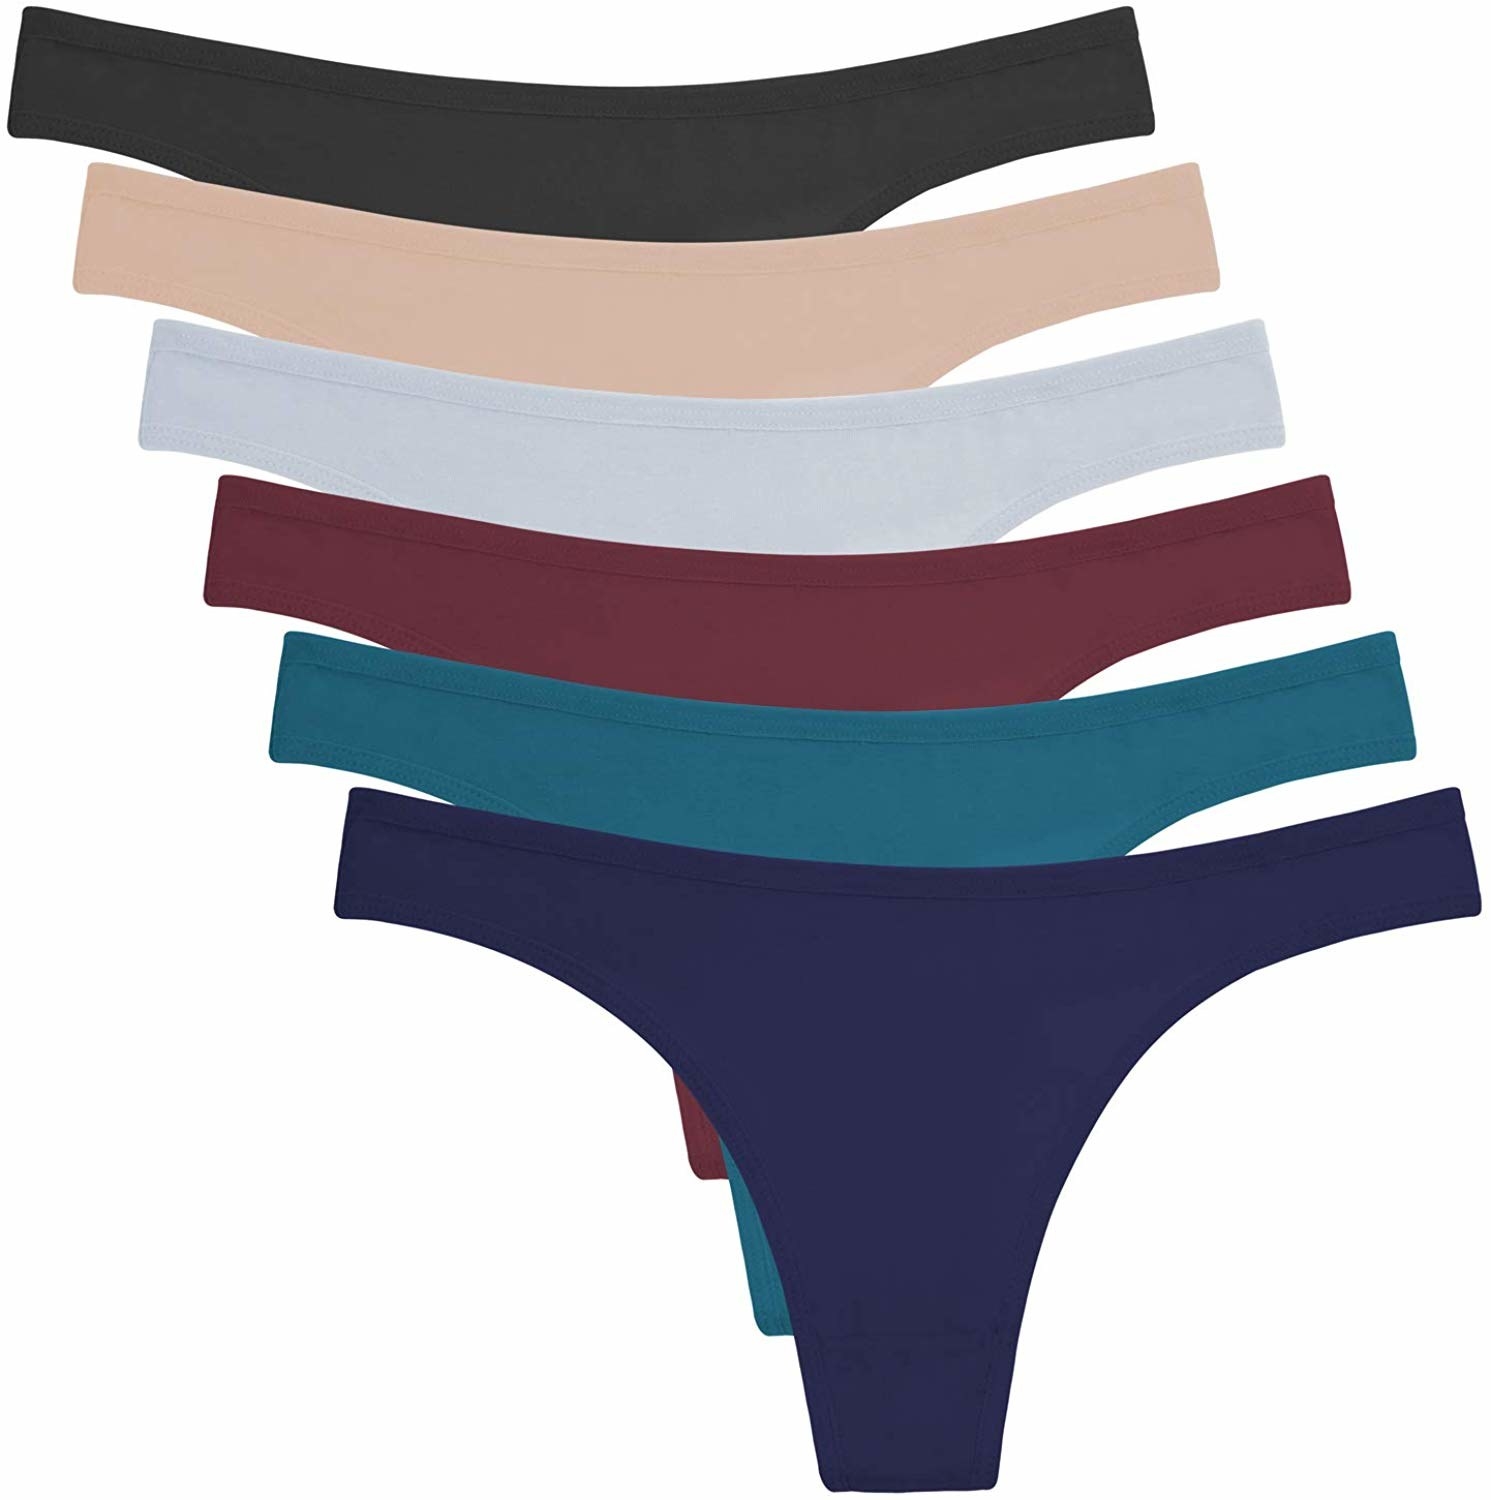 The pack of thong underwear